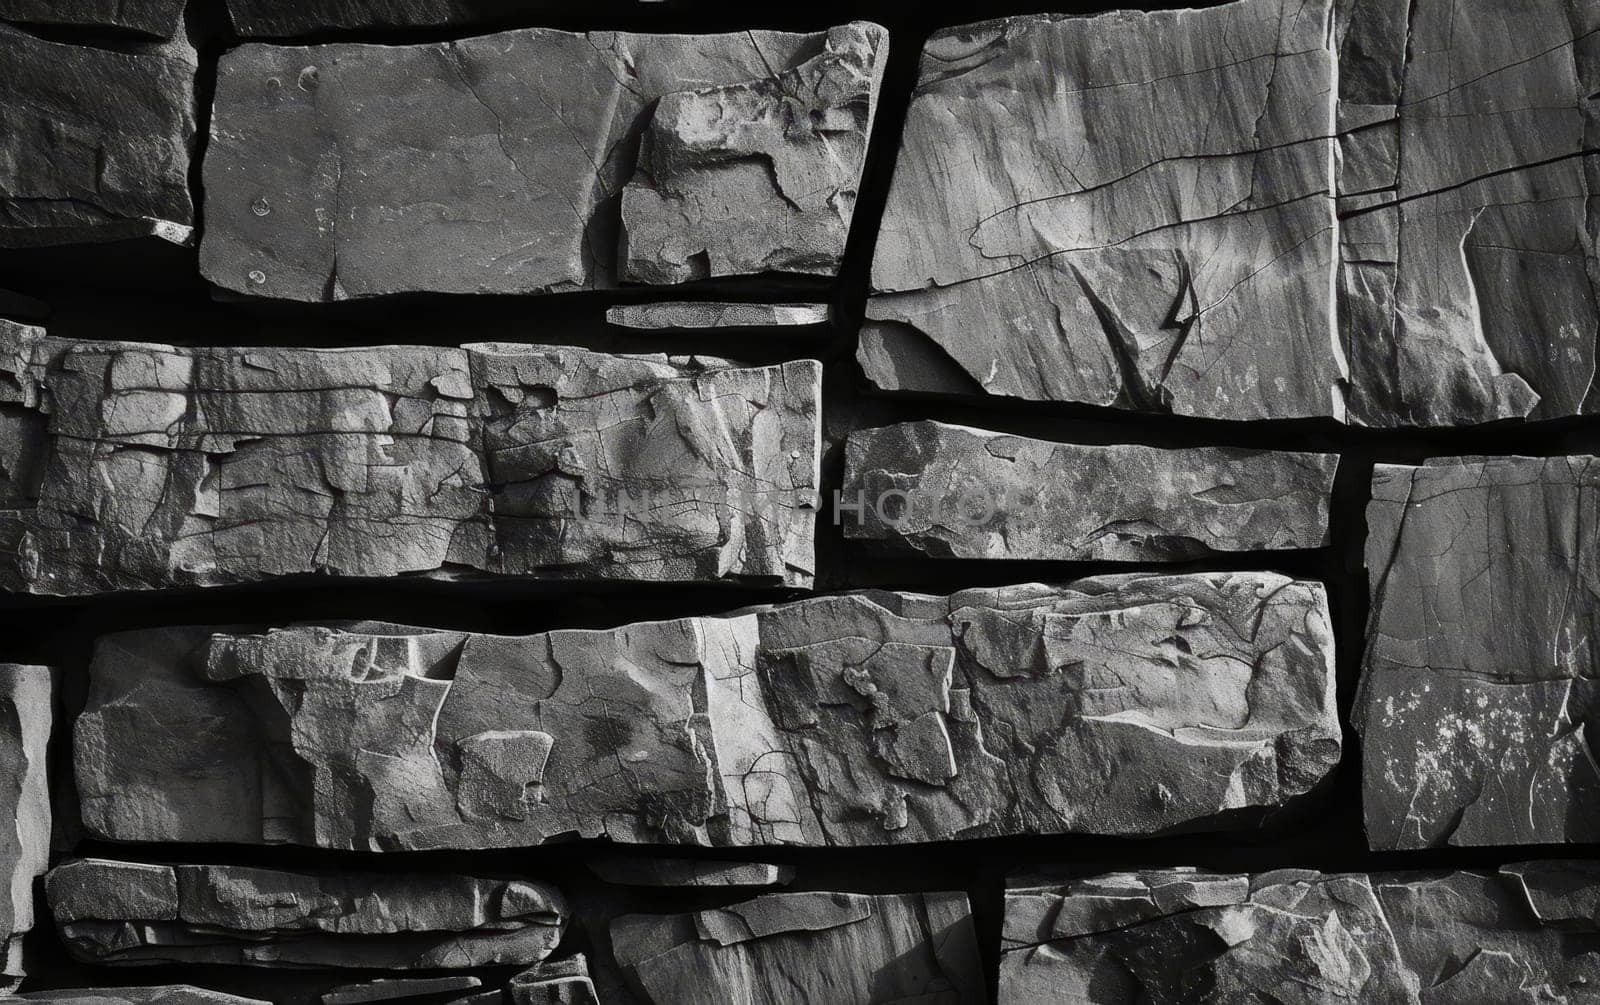 Monochrome image of a stone wall constructed with rectangular slates showing cracks and textures.. by sfinks